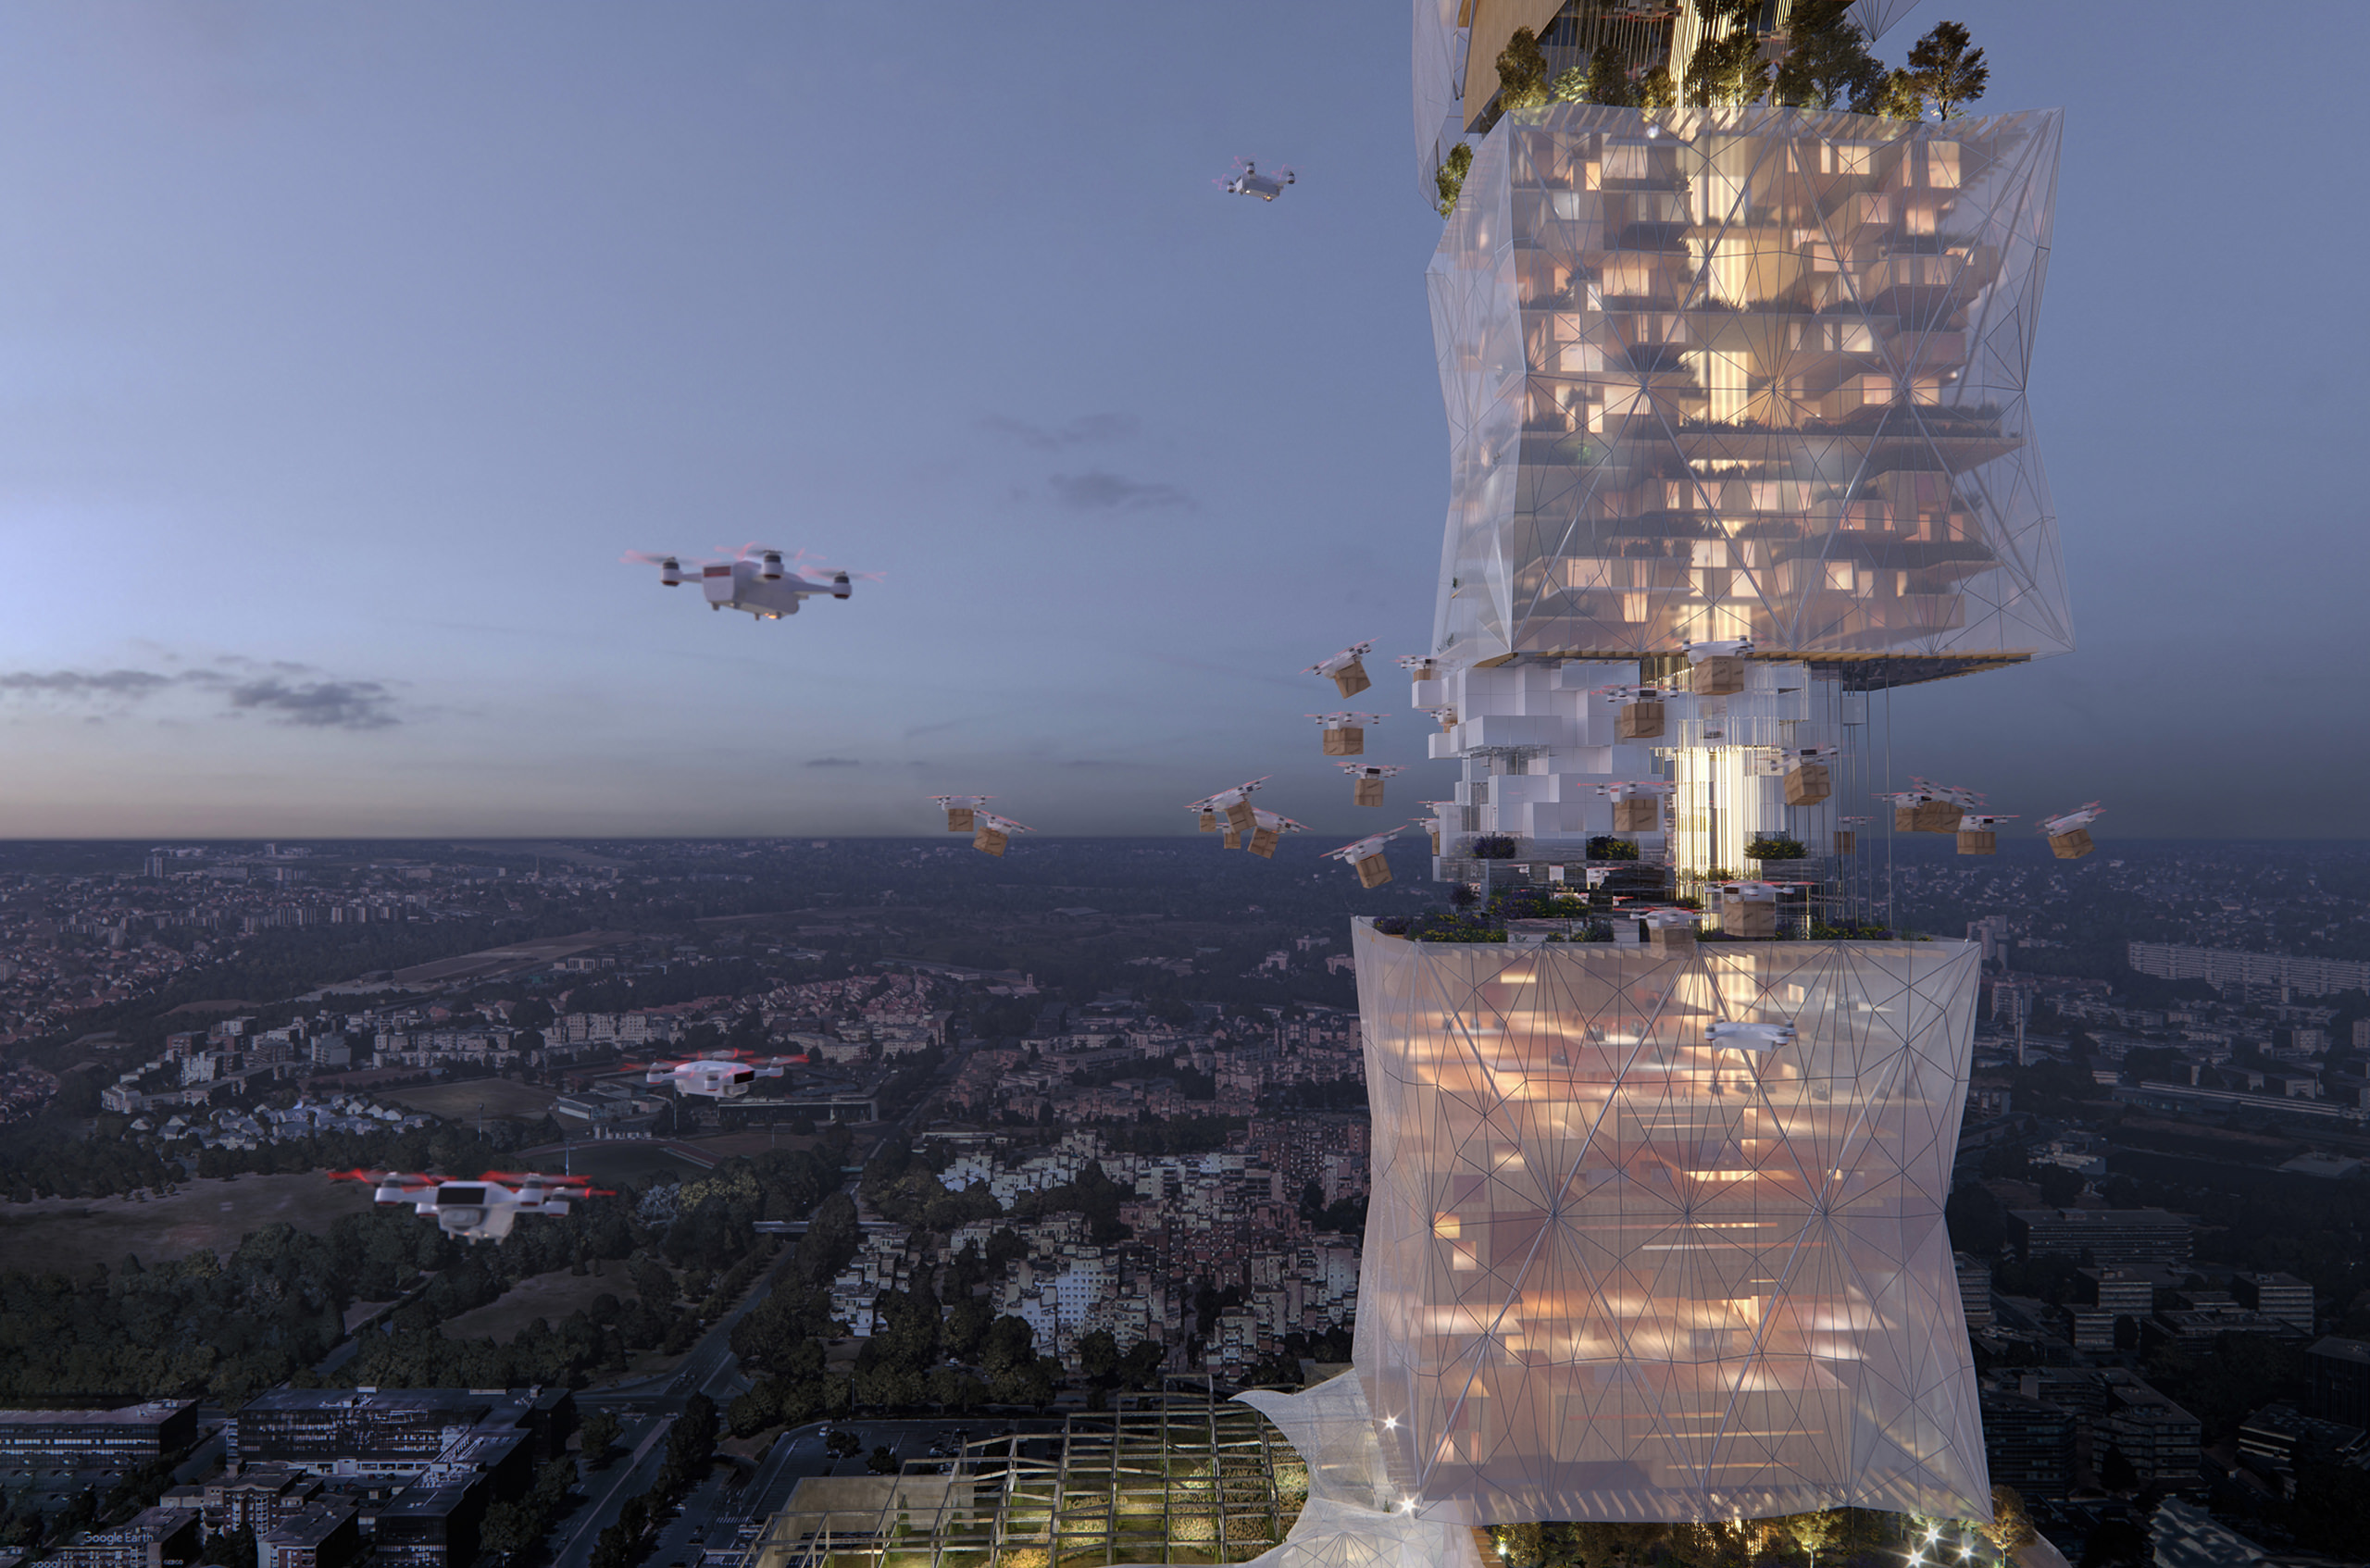 Detailed 3D view of the skyscraper concept with drones delivering goods on open floors